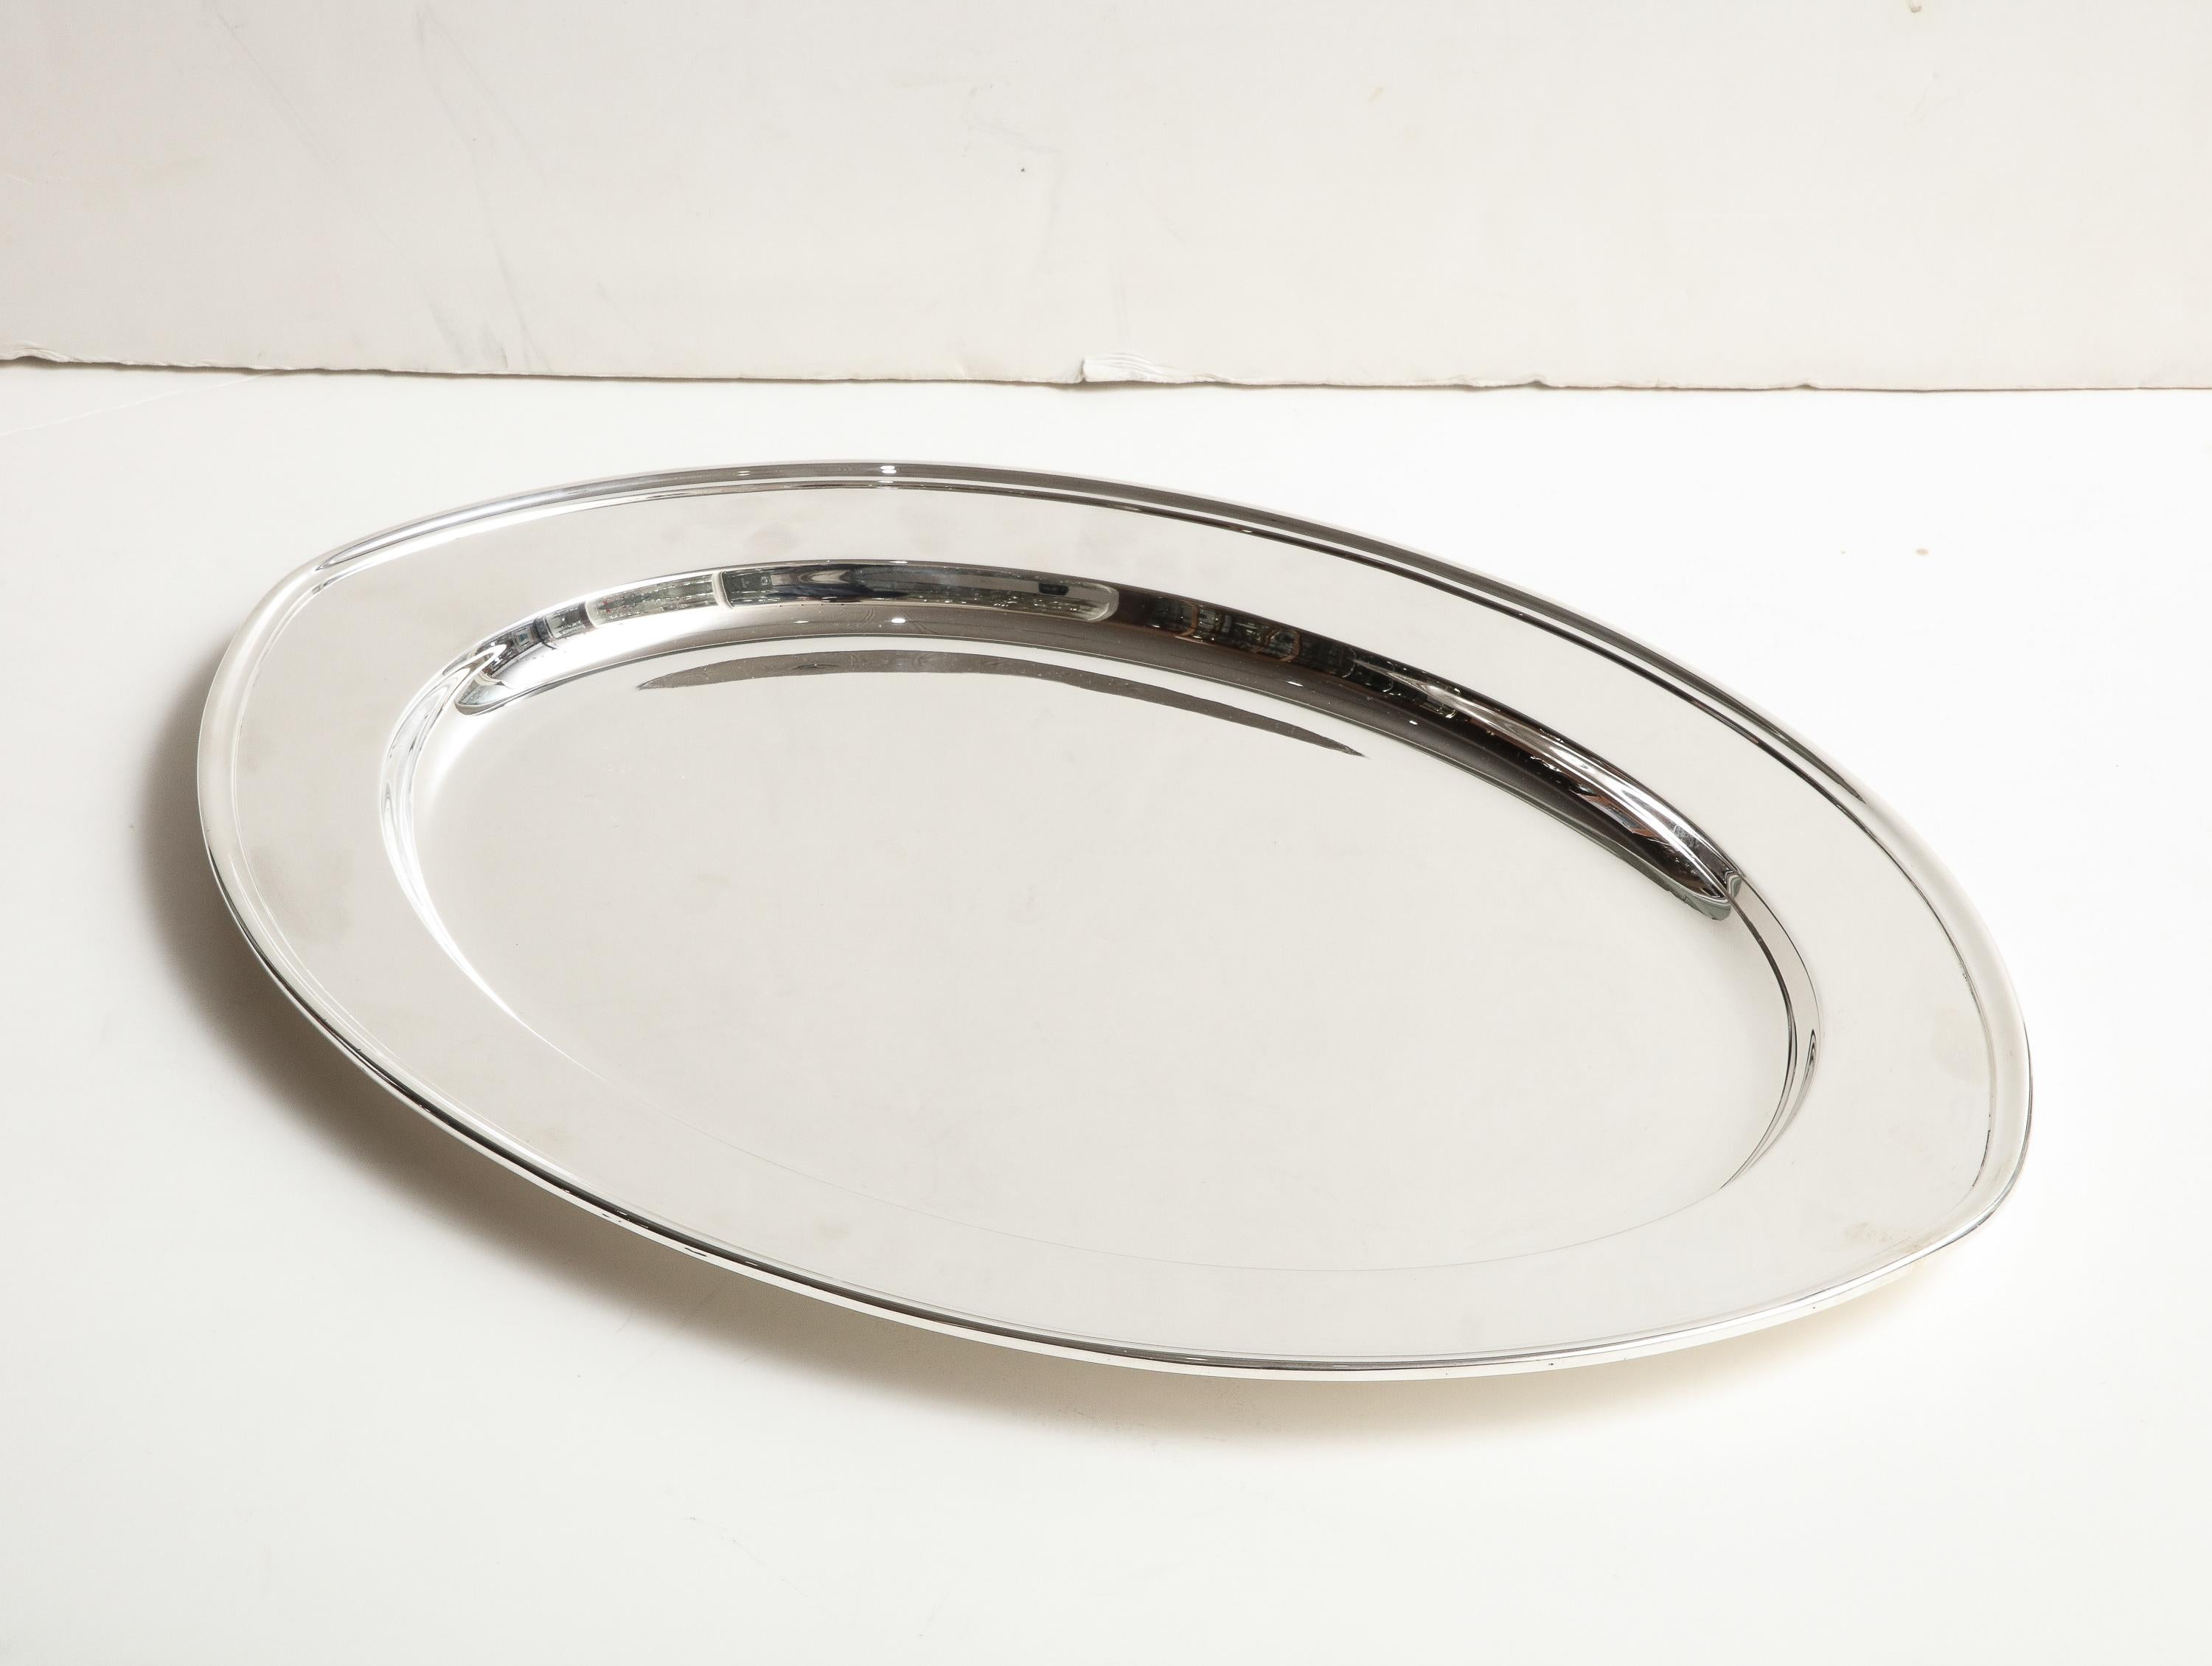 Large Art Deco Period Solid Sterling Silver Serving Platter By Gorham For Sale 7